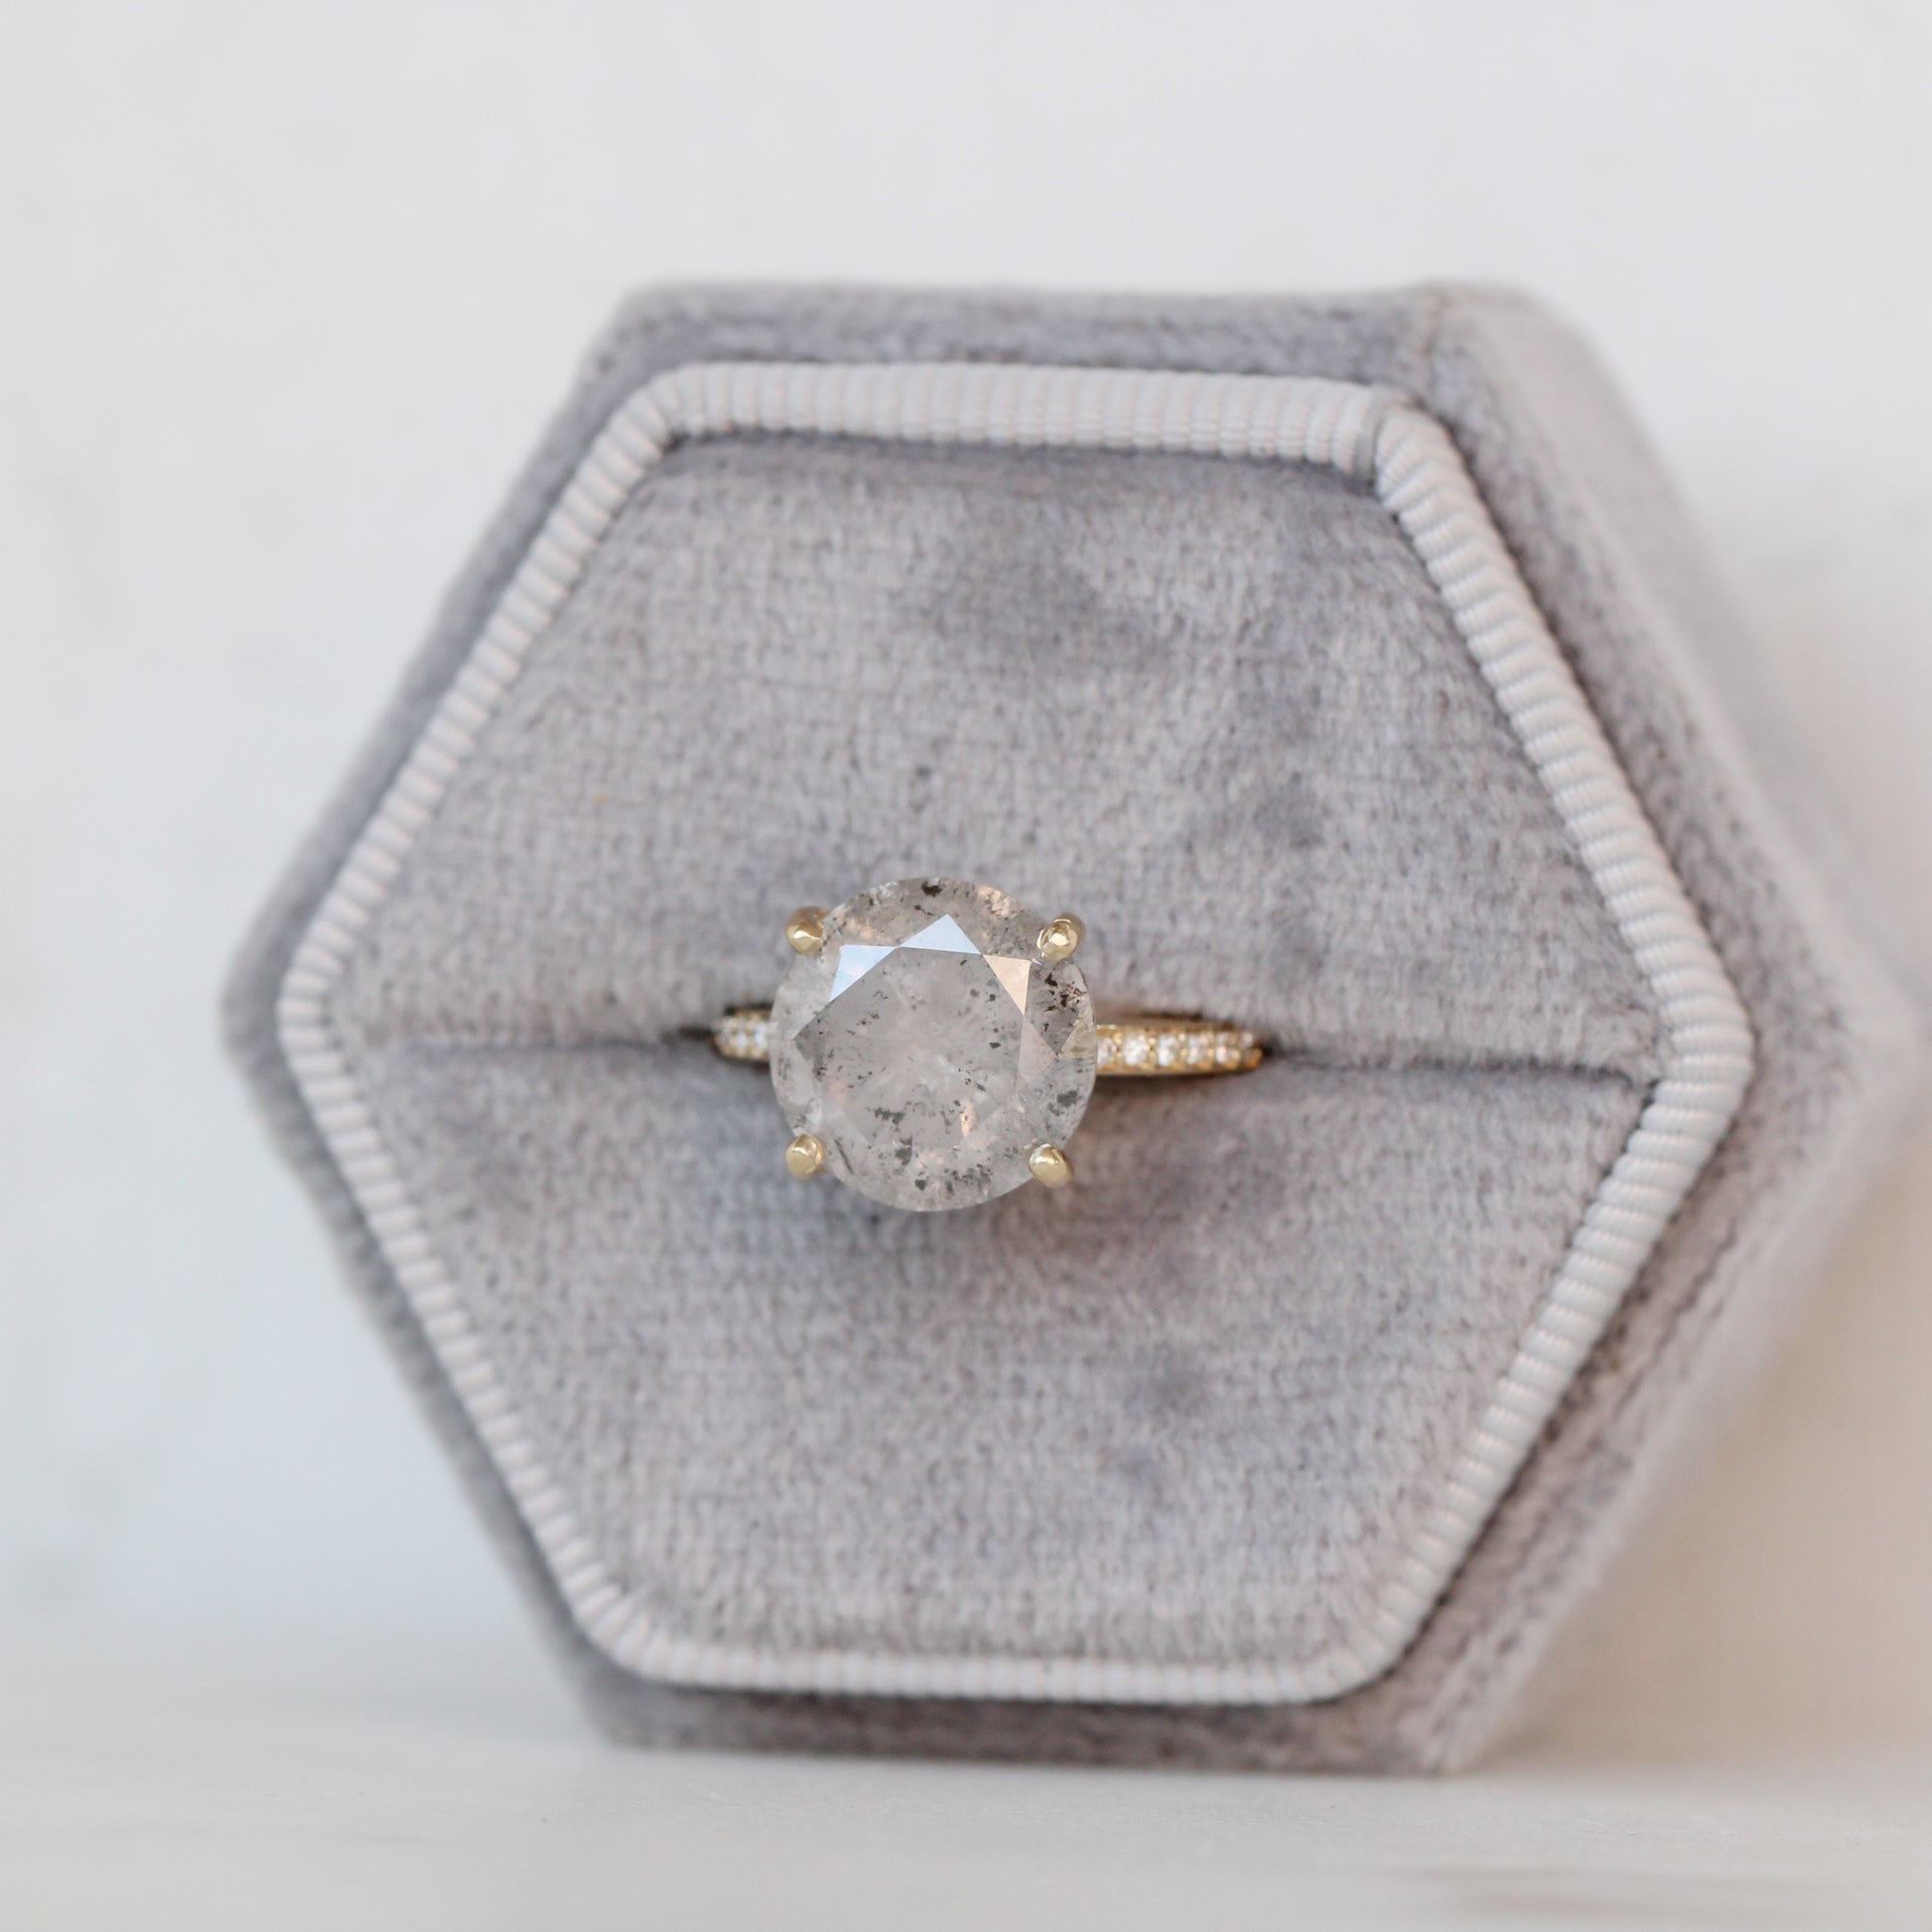 Imani Ring with a 4.87 Carat Celestial Diamond in 14k Yellow Gold - Ready to size and ship - Midwinter Co. Alternative Bridal Rings and Modern Fine Jewelry